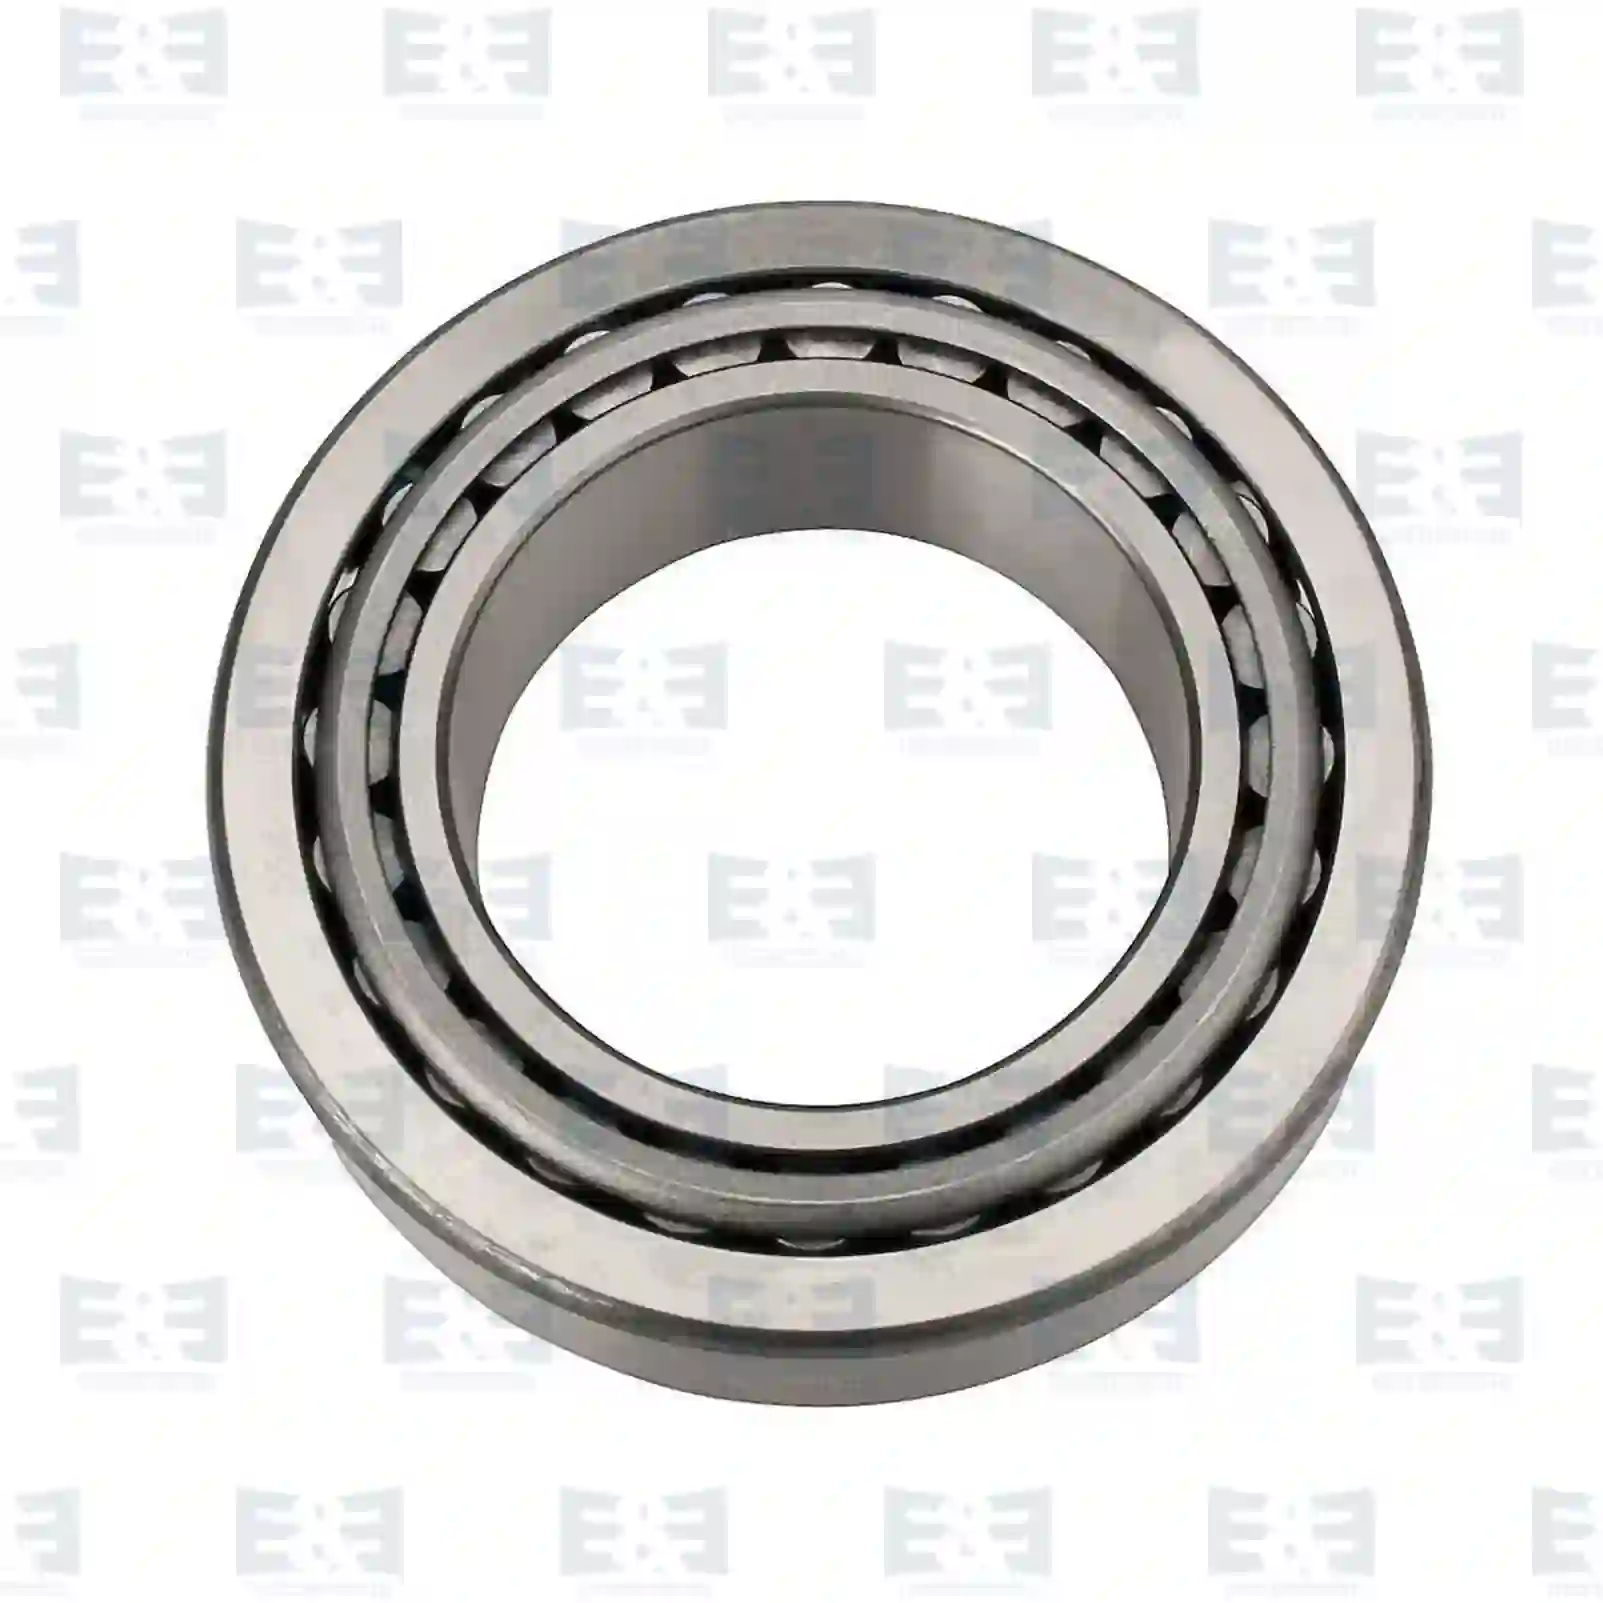 Tapered roller bearing, 2E2270757, 0221664, 221664, 5000788406, 06324990040, 06324990131, 06324990189, 81934200270, 0009814218, 0039813005, 0039813205, 0089810305, 43210-D930A, 0023433115, 5000788406, 184678, ZG03011-0008 ||  2E2270757 E&E Truck Spare Parts | Truck Spare Parts, Auotomotive Spare Parts Tapered roller bearing, 2E2270757, 0221664, 221664, 5000788406, 06324990040, 06324990131, 06324990189, 81934200270, 0009814218, 0039813005, 0039813205, 0089810305, 43210-D930A, 0023433115, 5000788406, 184678, ZG03011-0008 ||  2E2270757 E&E Truck Spare Parts | Truck Spare Parts, Auotomotive Spare Parts